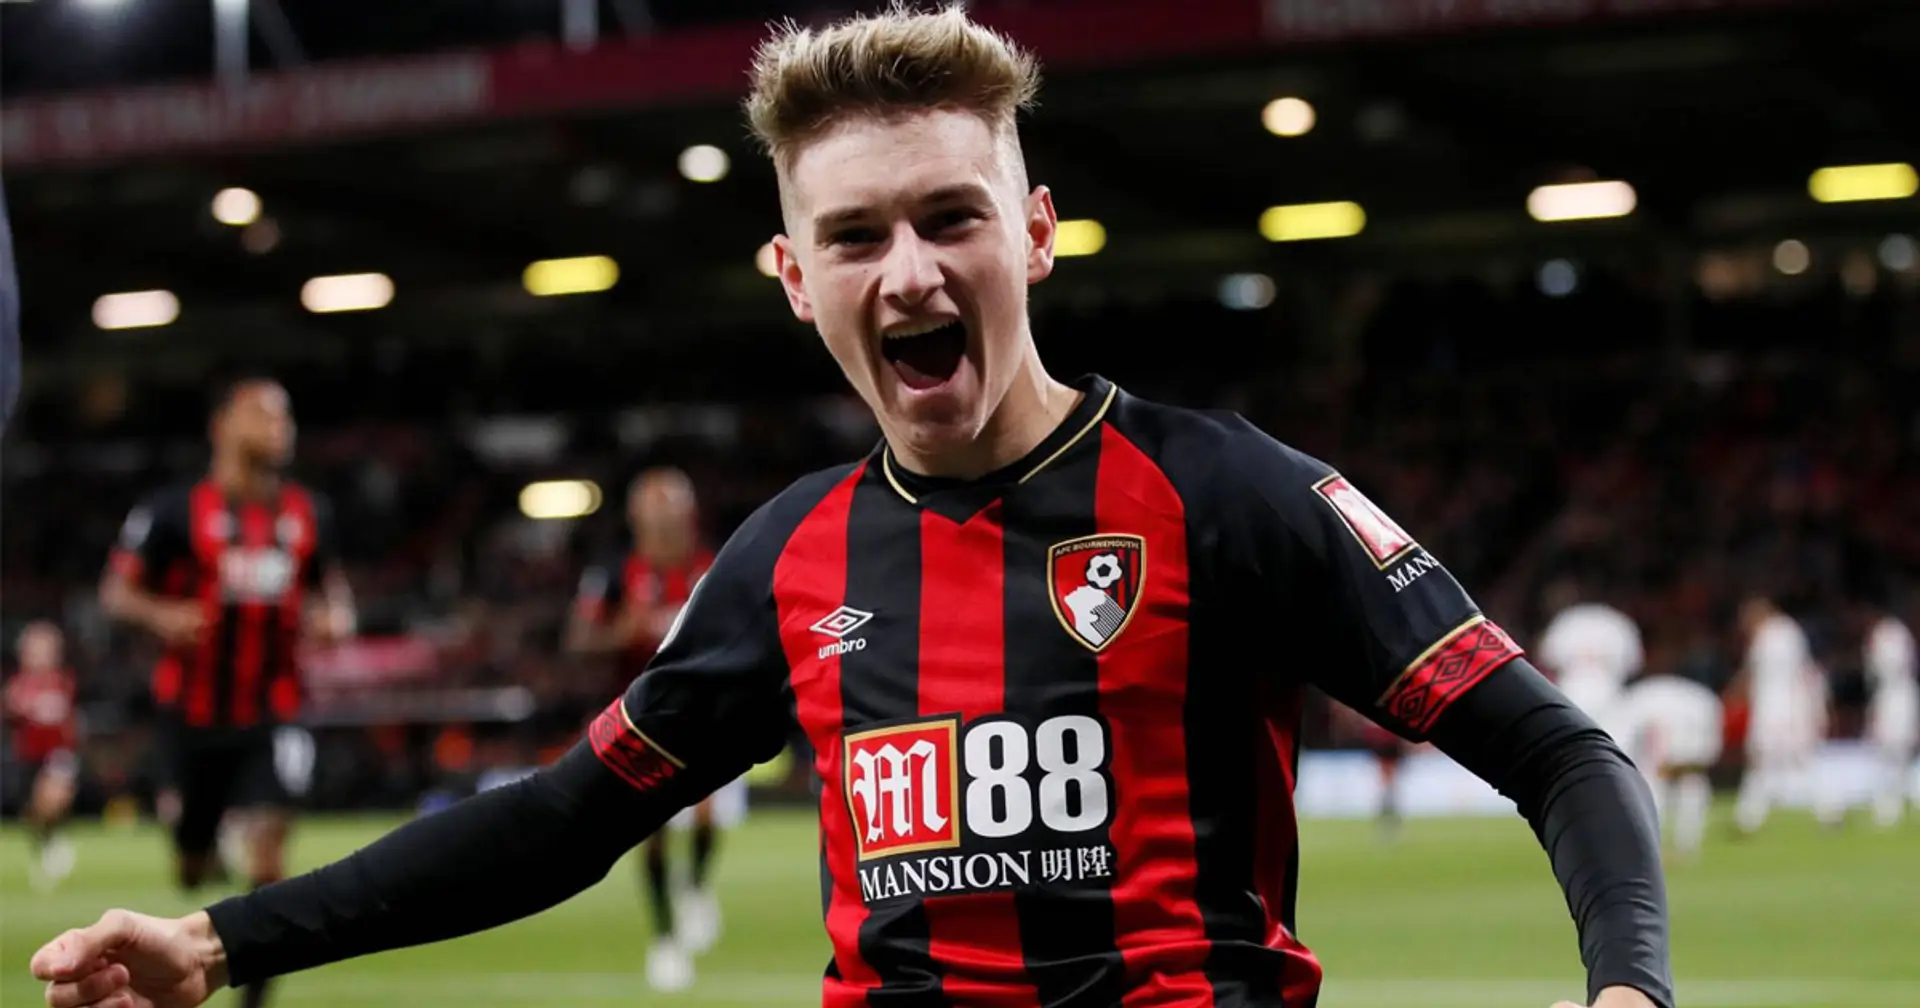 Bournemouth reportedly set asking price for David Brooks amid United interest